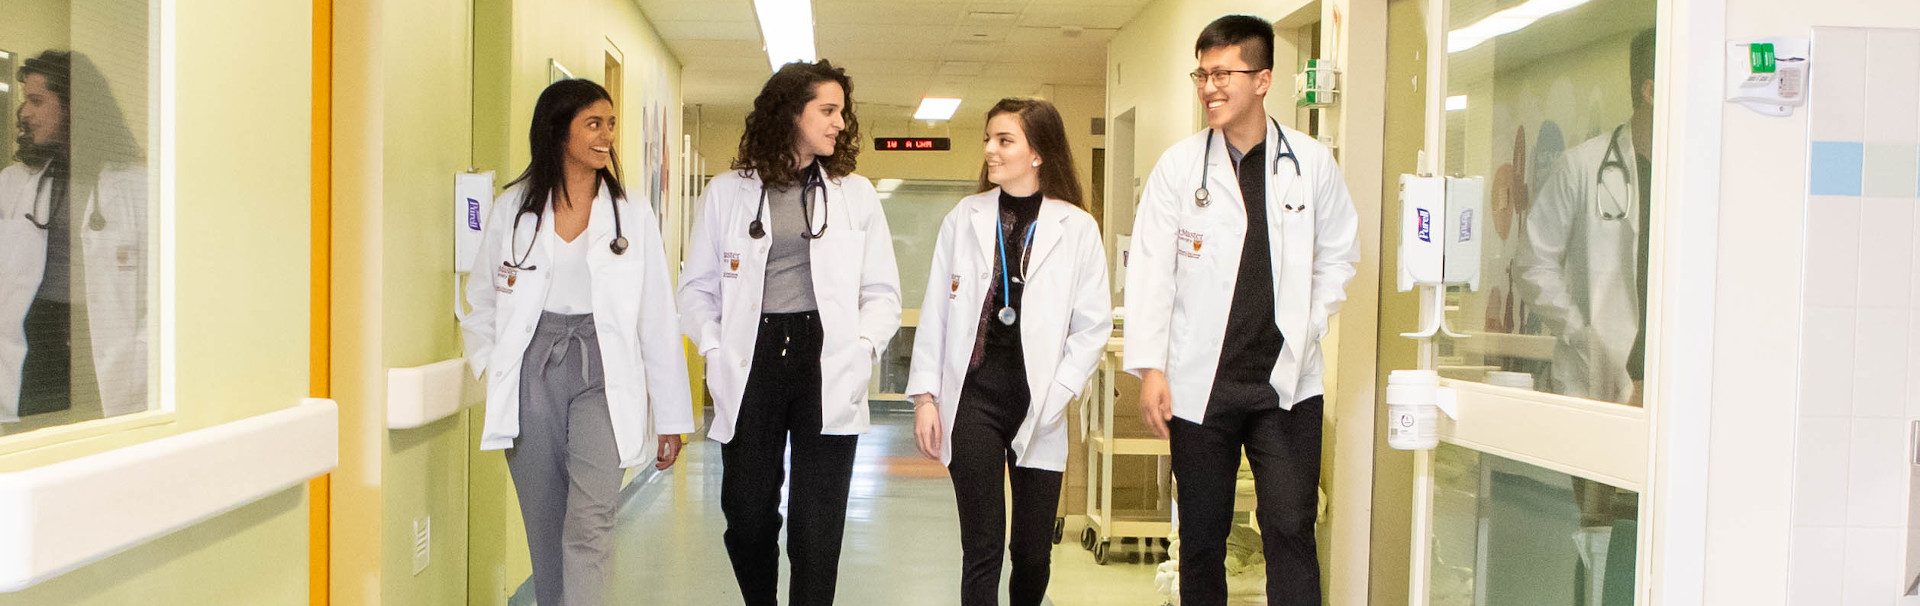 Four students dressed in white coats in a hallway